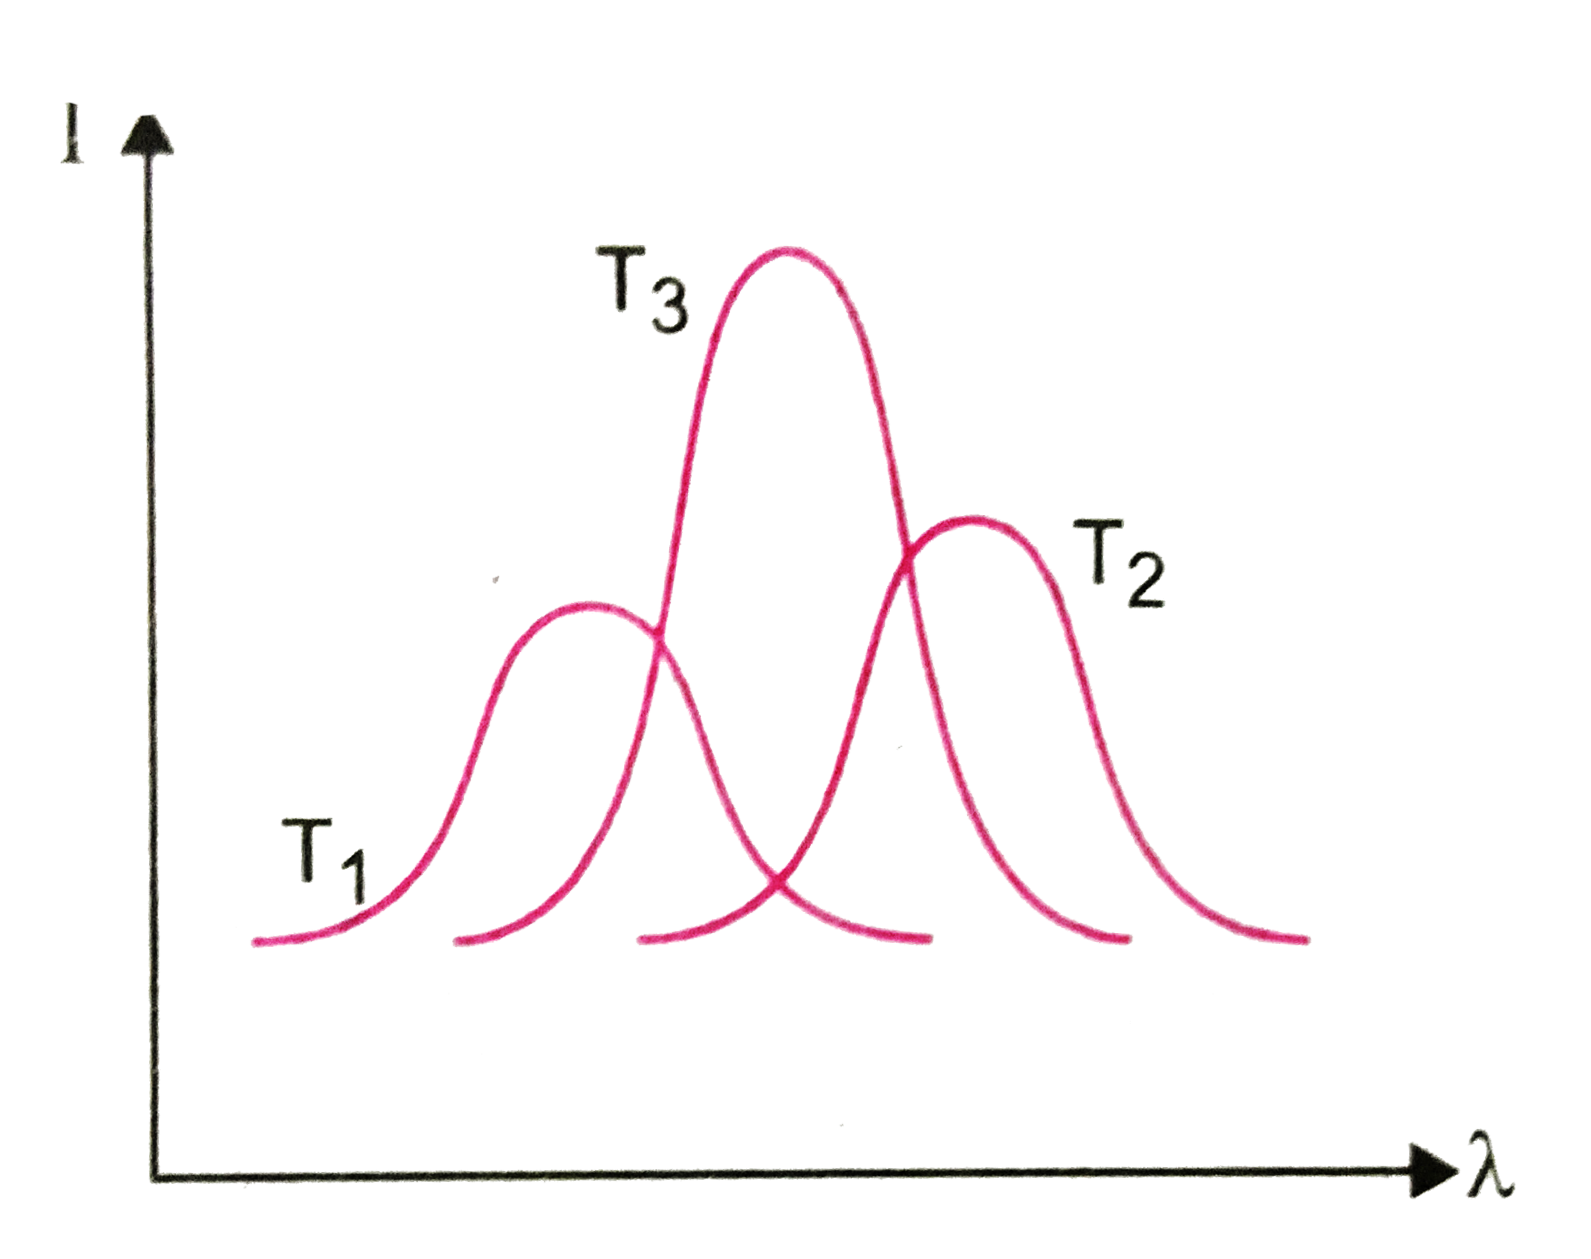 The plots of intensity (I) of radiation versus wavelength (gamma) of thee black bodies at temperatures T(1), T(2) and T(3) are shown in Fig.7(CF).25. Then,